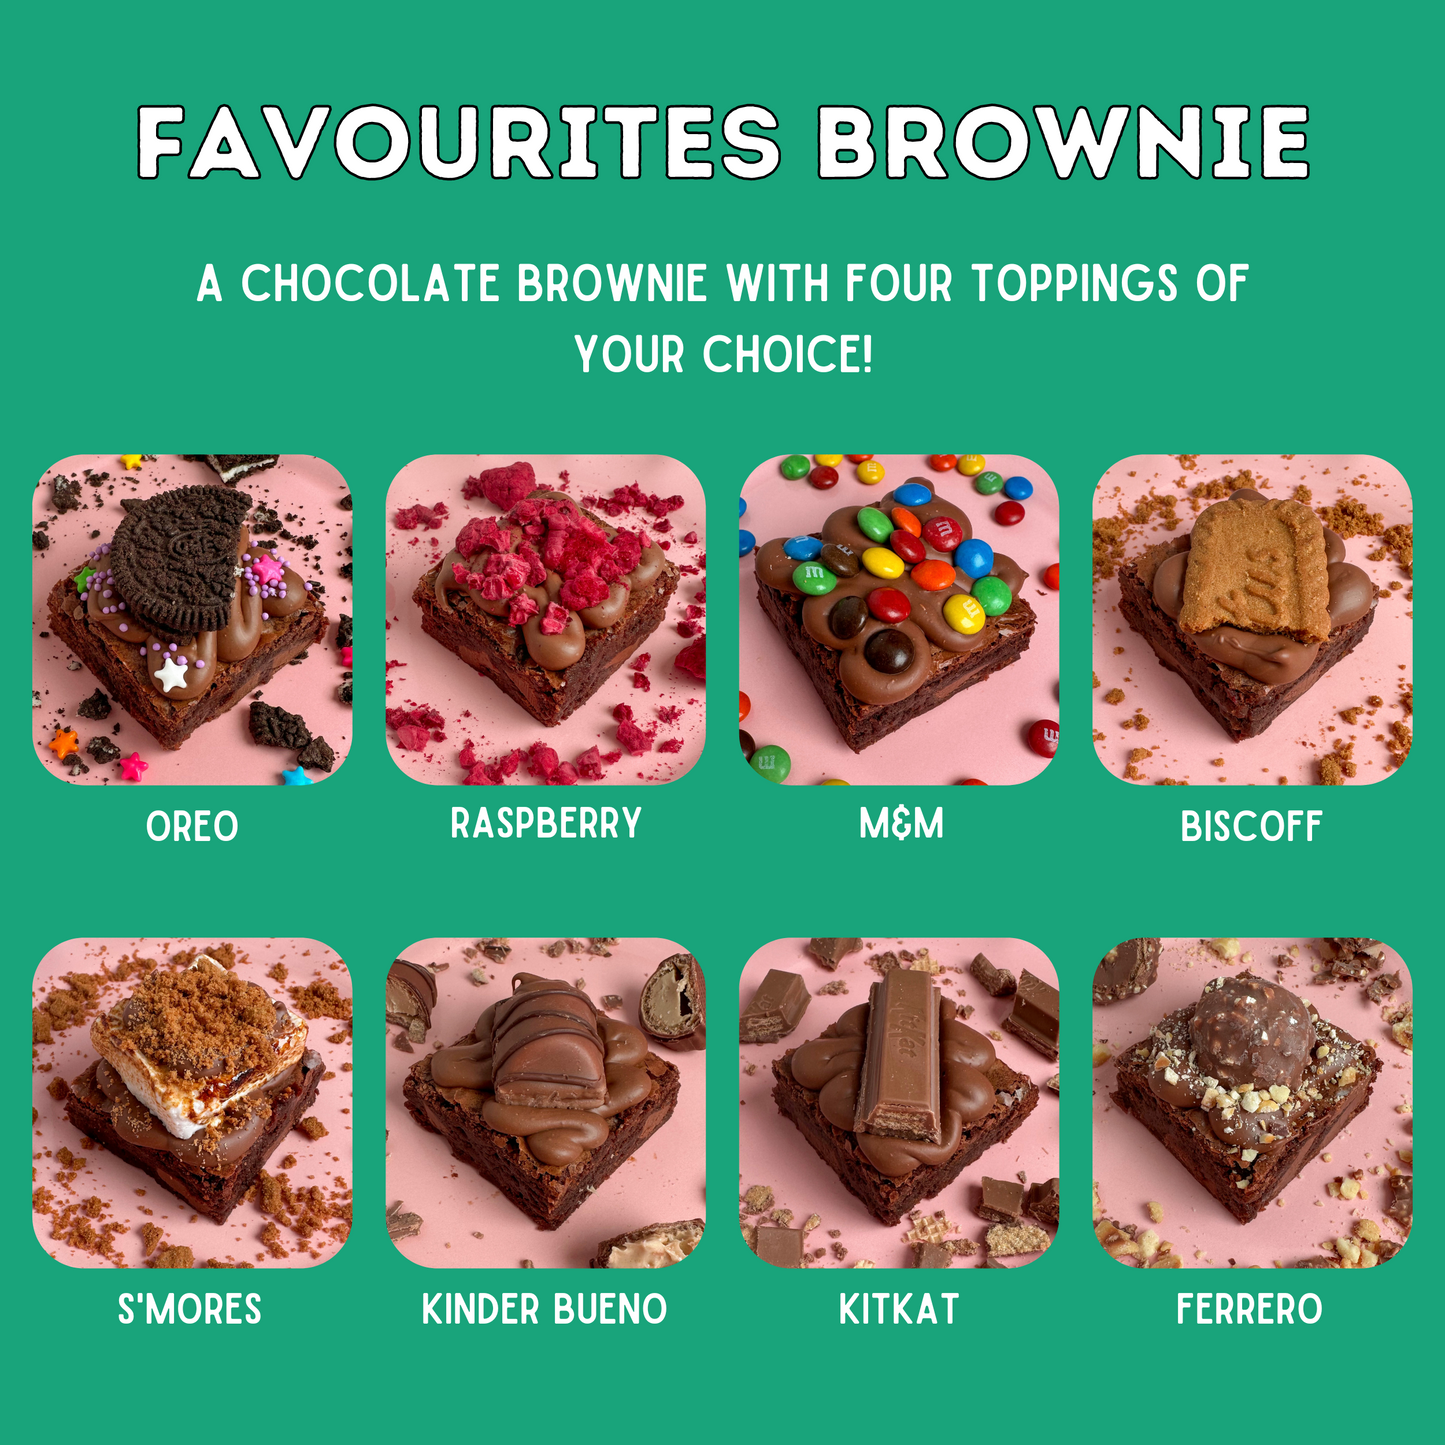 The favourites brownie flavour guide - oreo, raspberry, M&M, biscoff, s'mores, Kinder bueno, Kitkat and Ferrero rocher. Pick your top four!